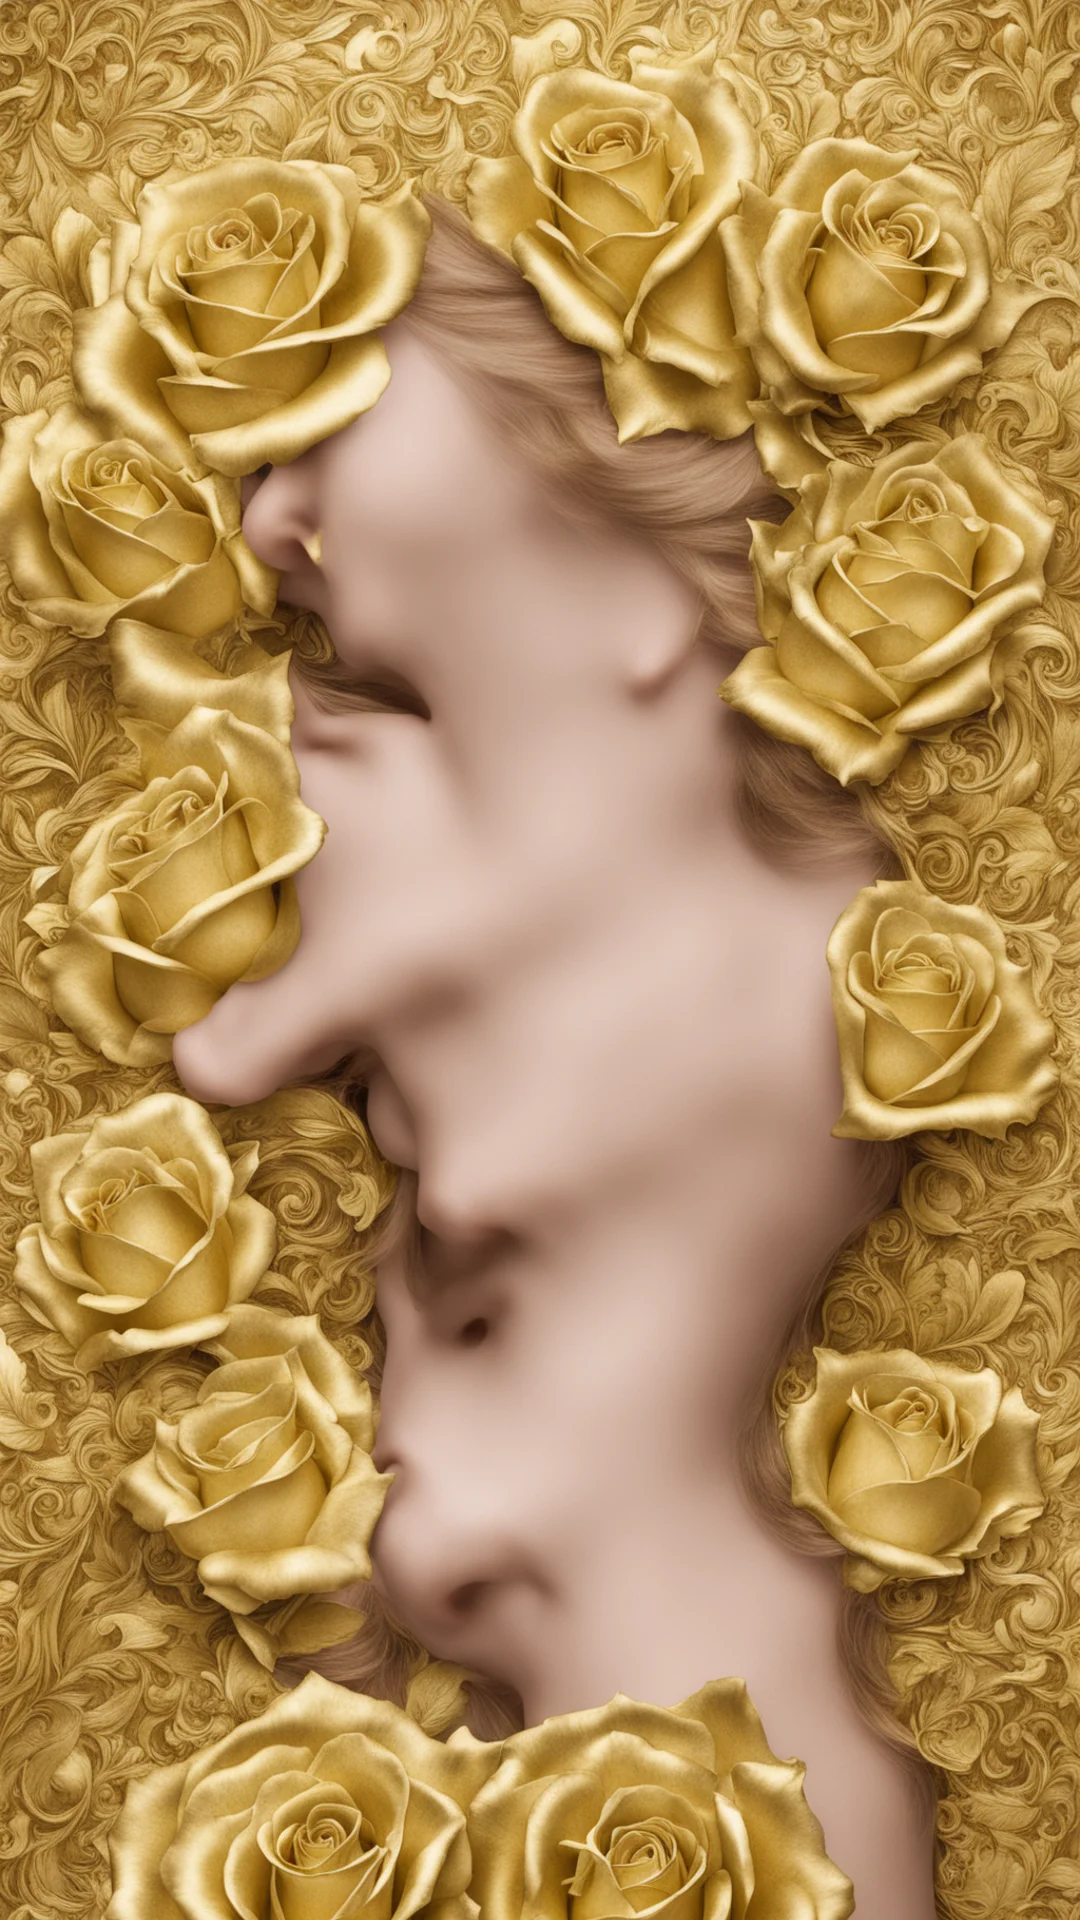 aiartstation art nouveau gold roses with a woman confident engaging wow 3 tall